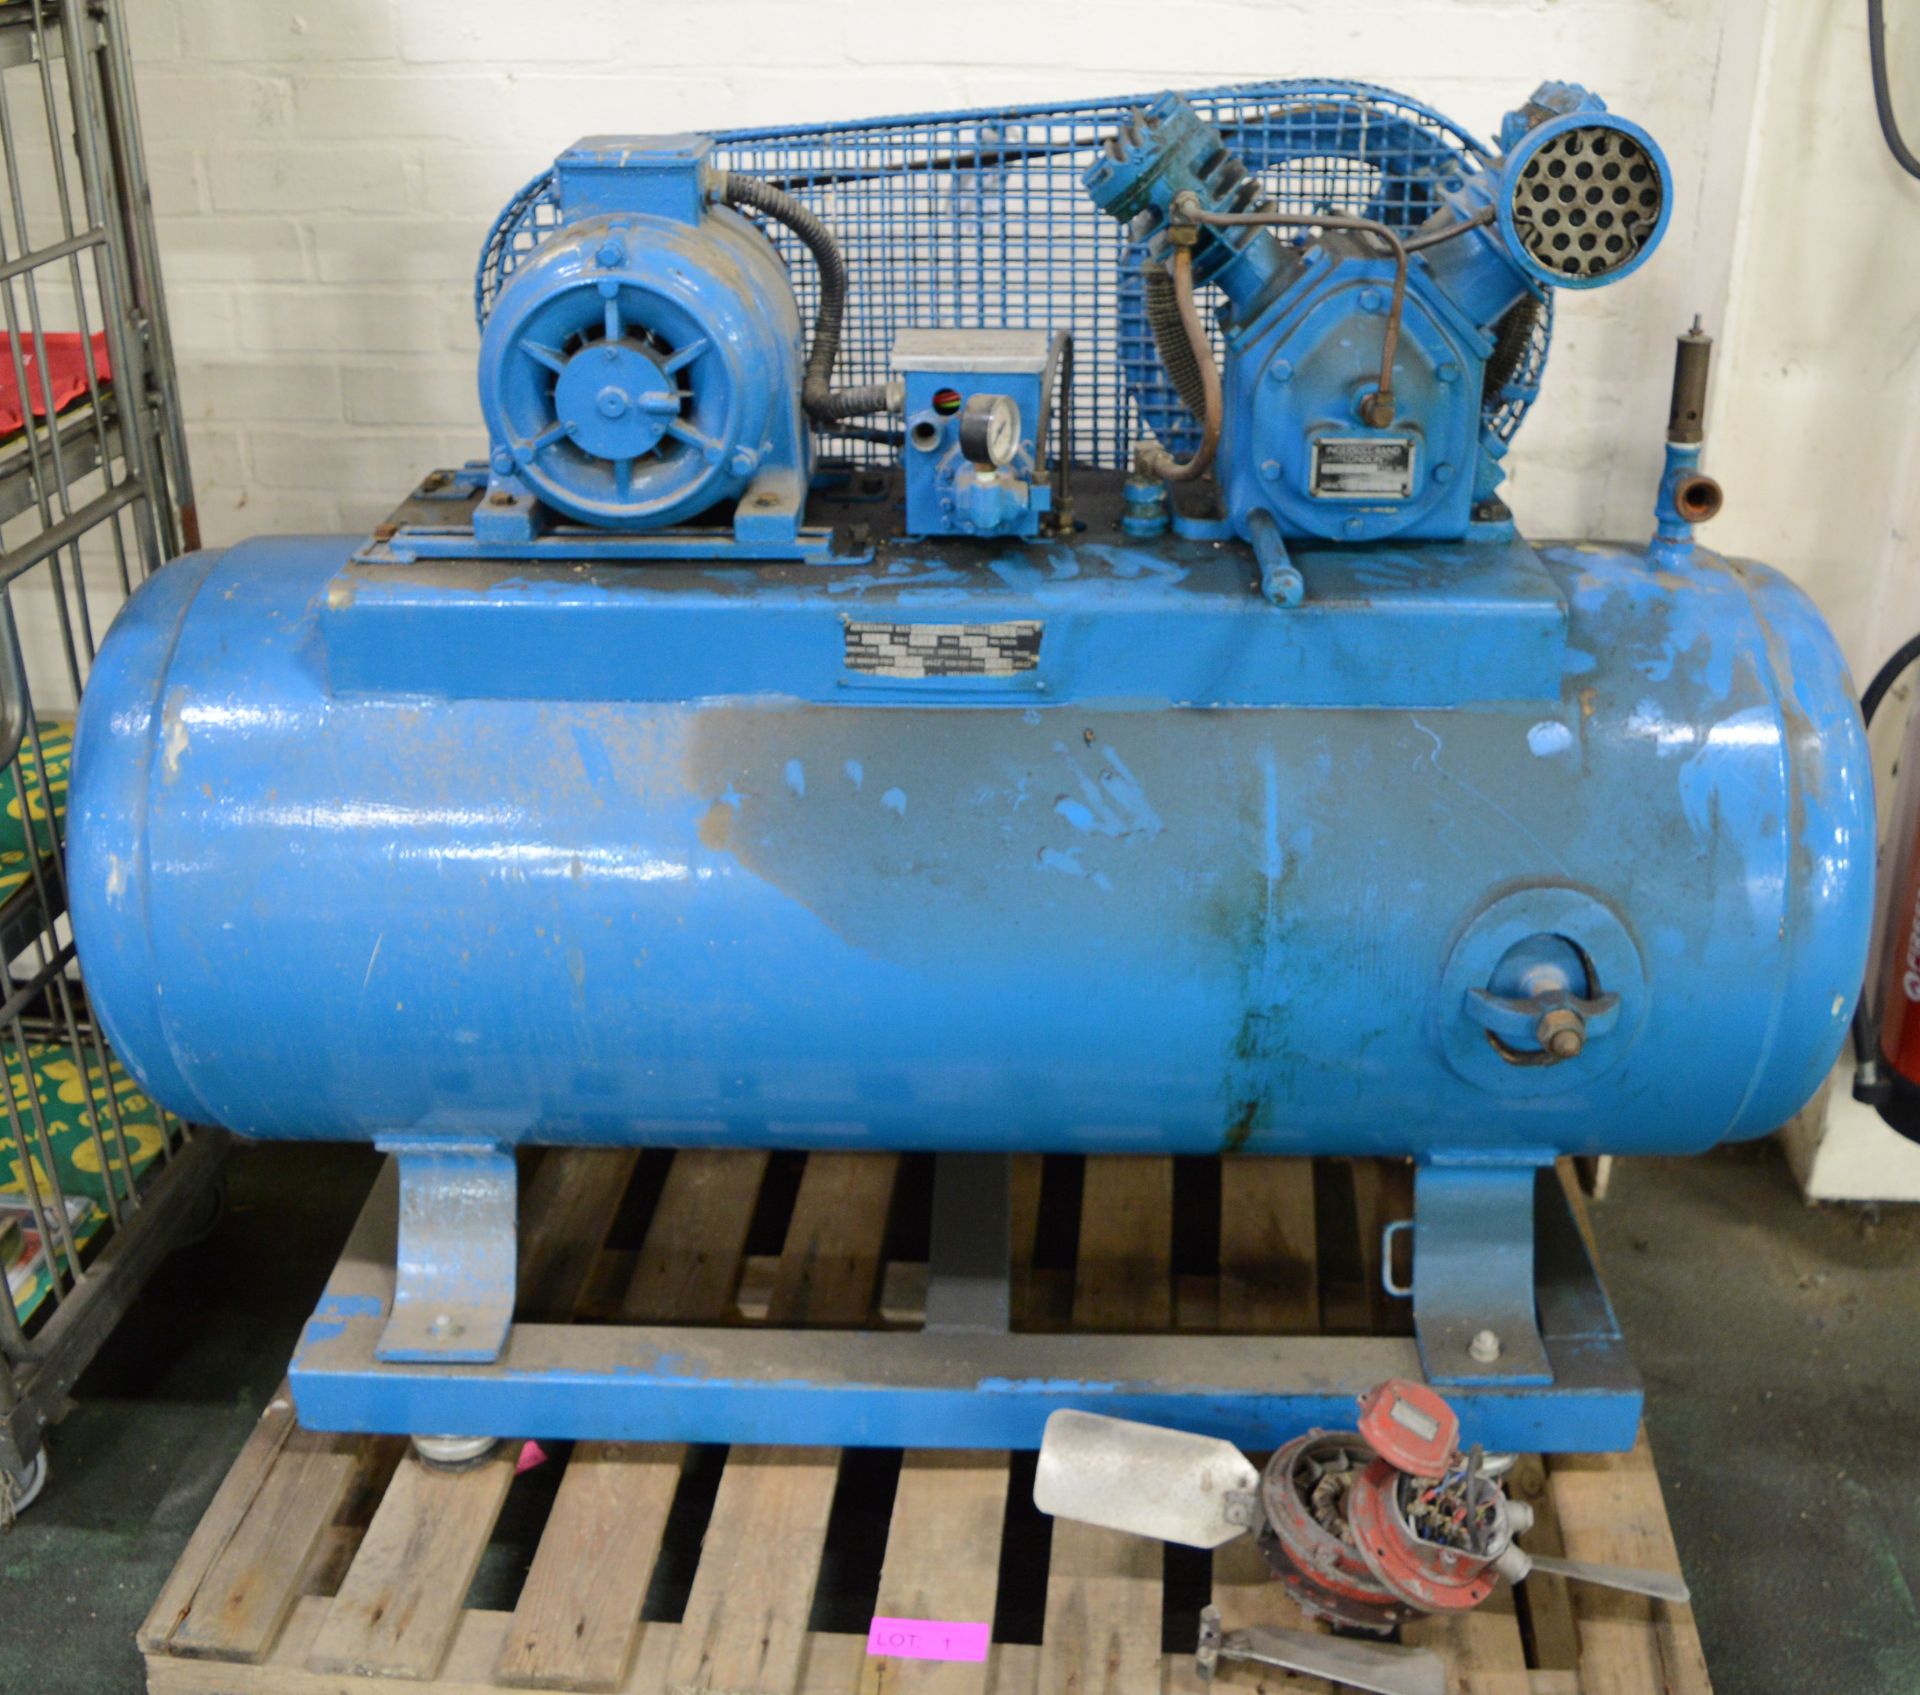 Ingersoll Rand Air Compressor - 220 PSI - 415V - A £5 LOADING FEE APPLIES TO THIS LOT